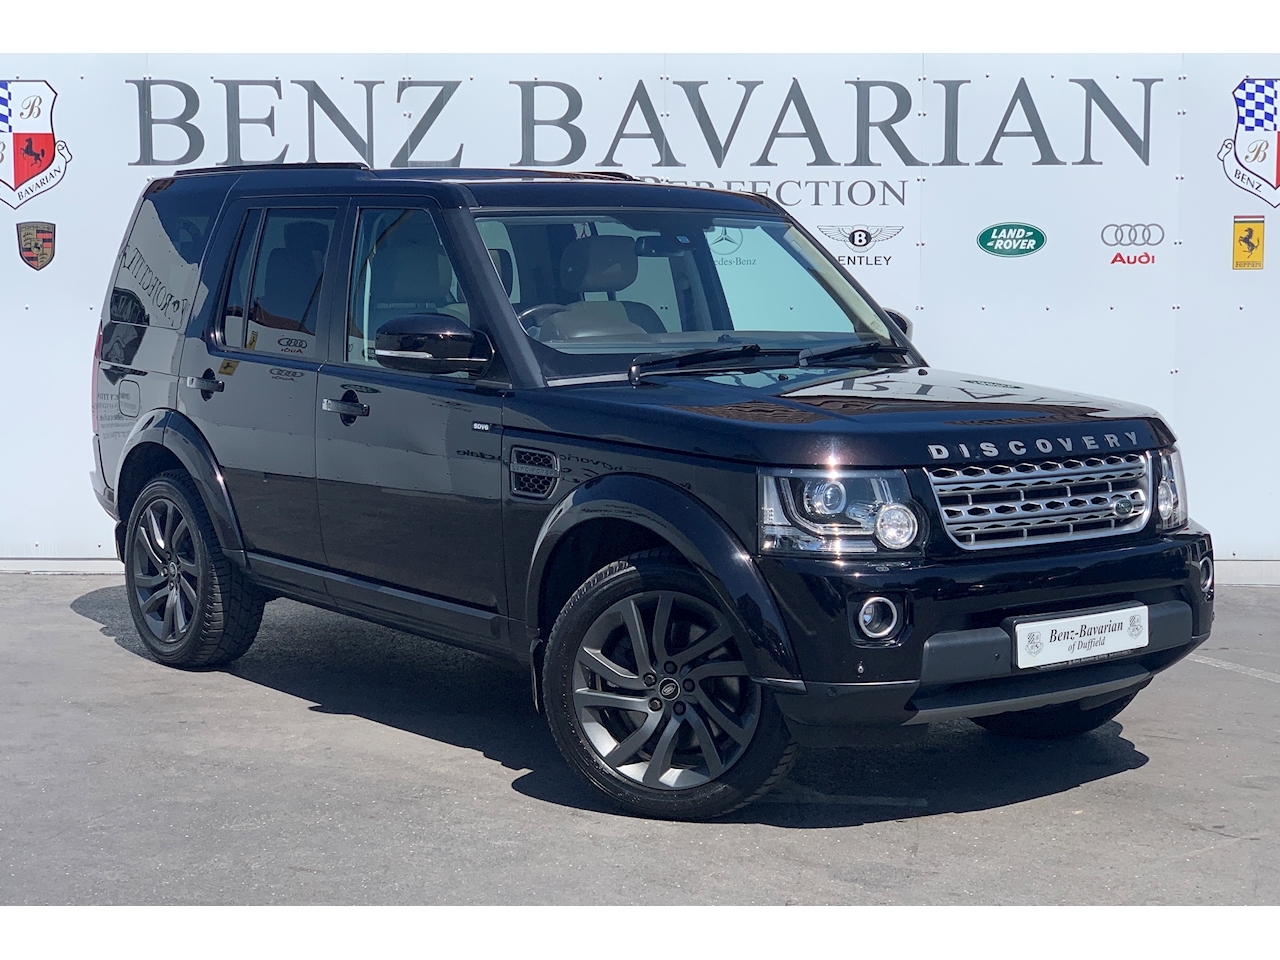 3.0 SD V6 HSE Luxury SUV 5dr Diesel Automatic (s/s) (203 g/km, 255 bhp)